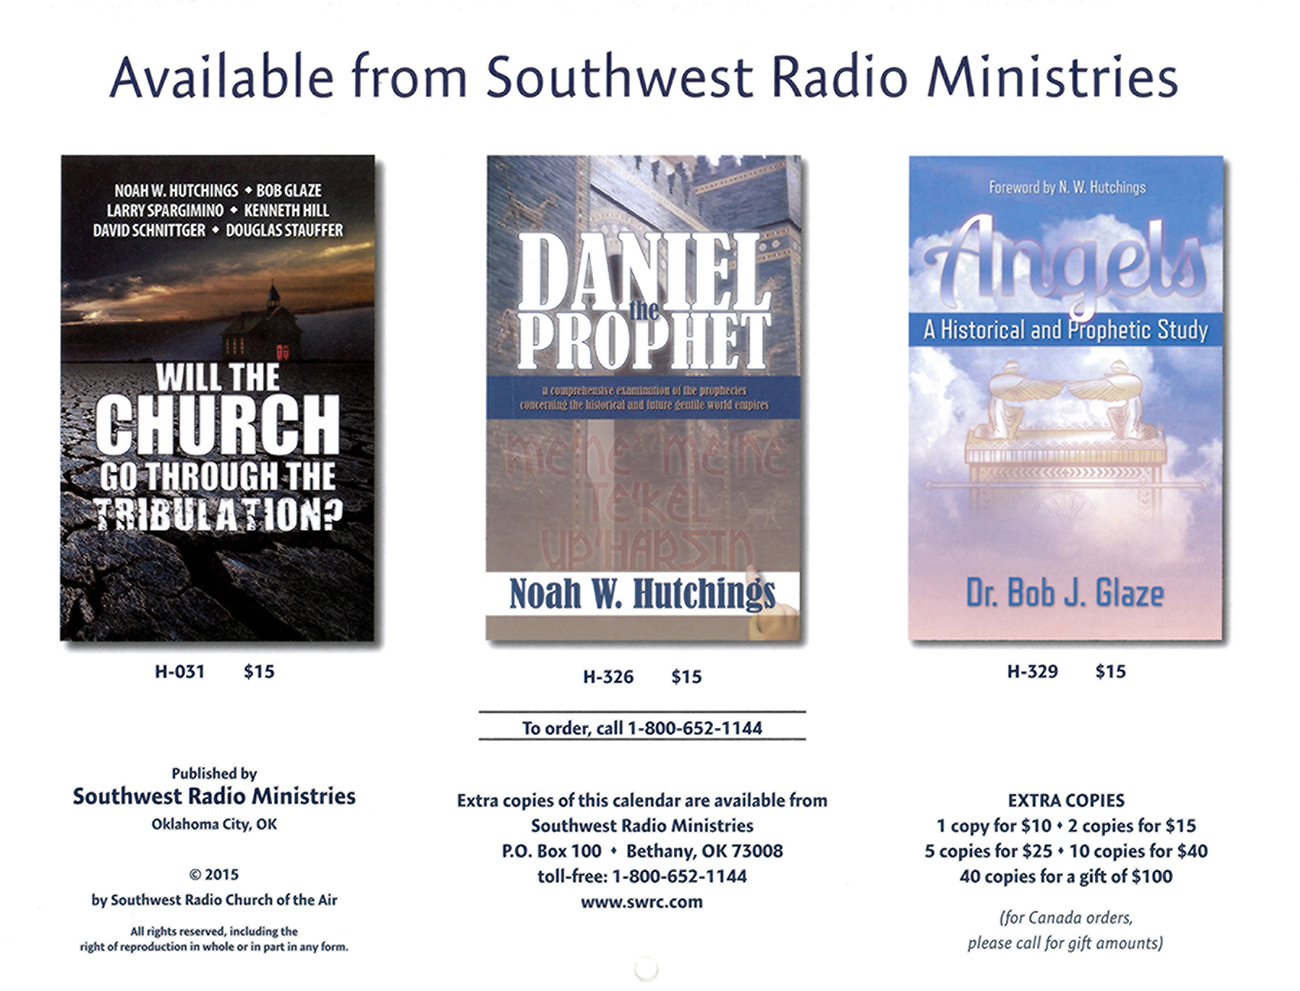 2016 Prophecy Calendar: Available from Southwest Ministries